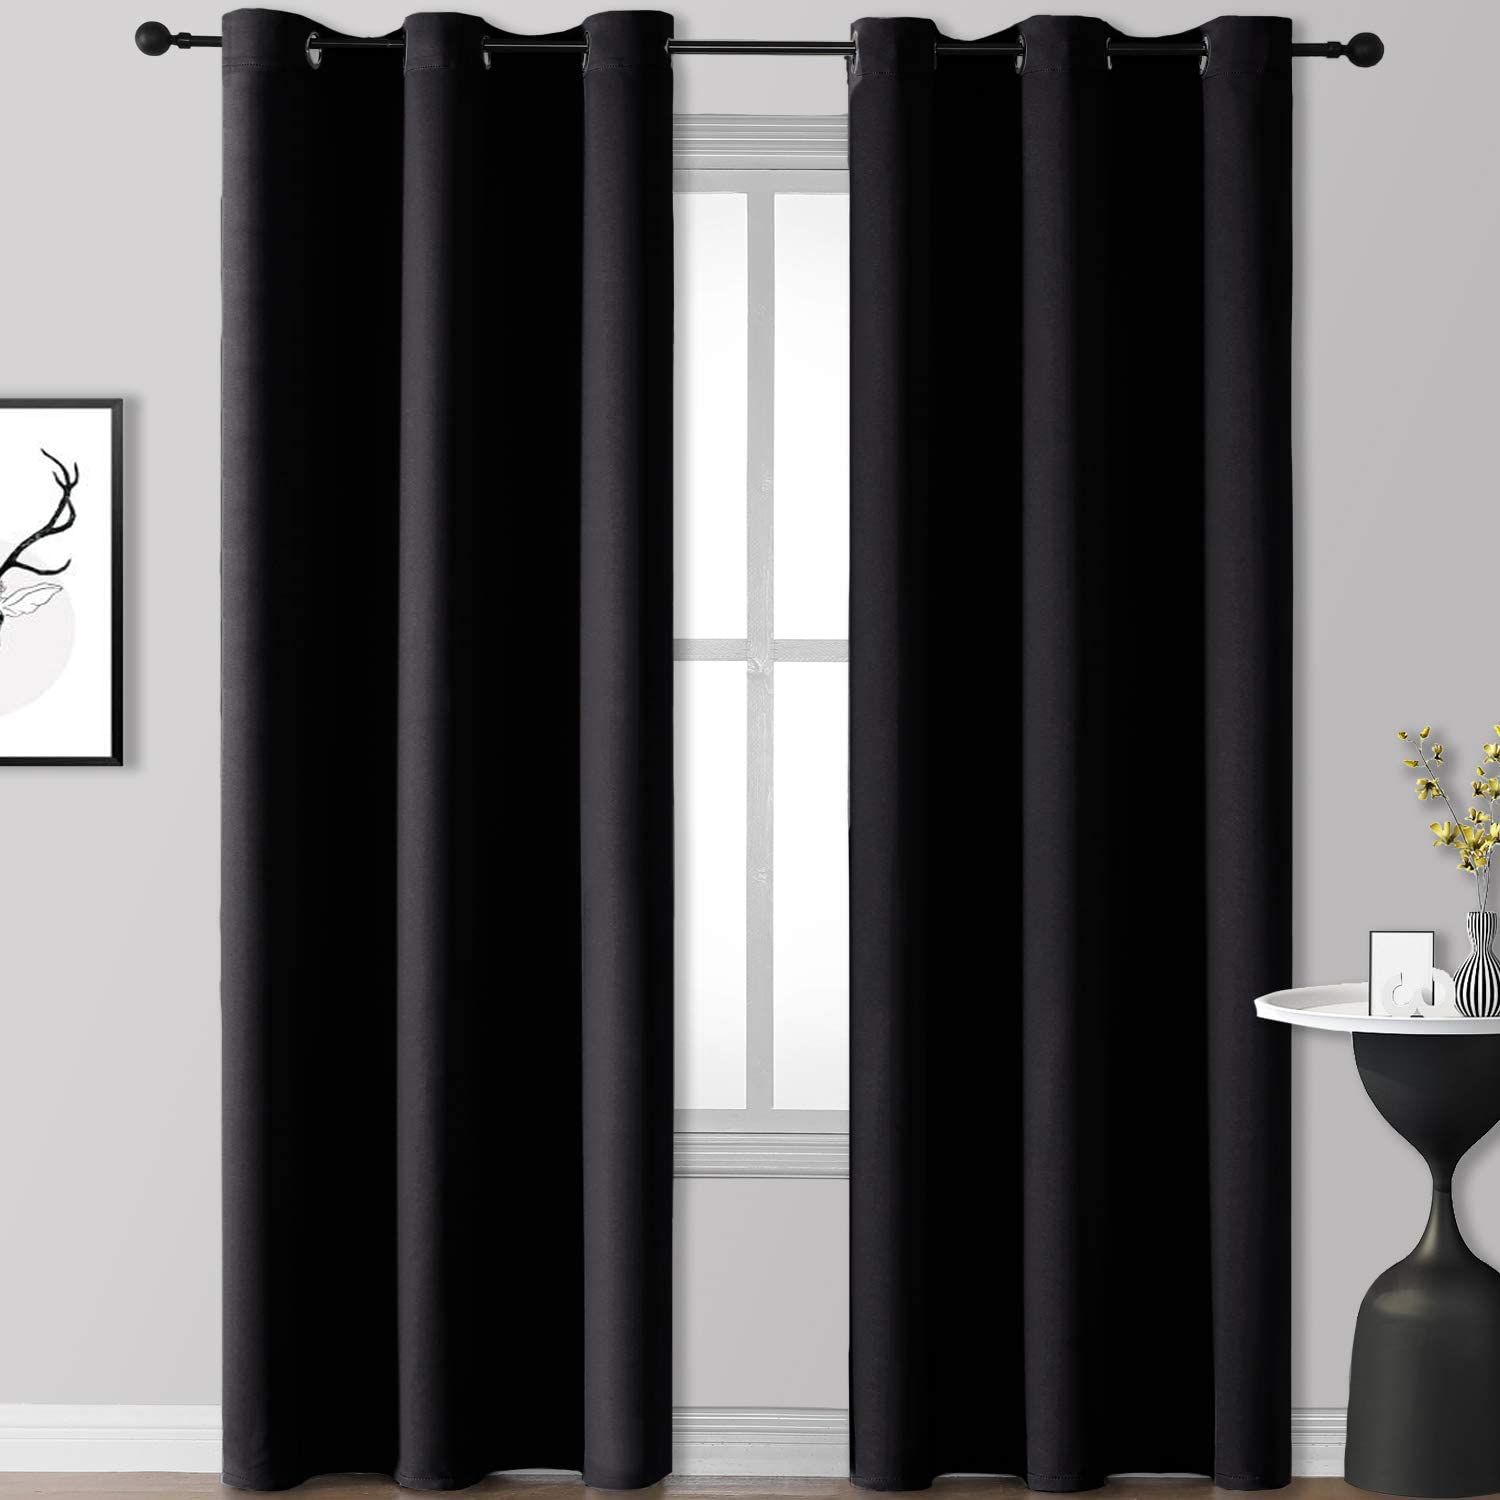 Rutterllow Insulated Thermal Blackout Curtains